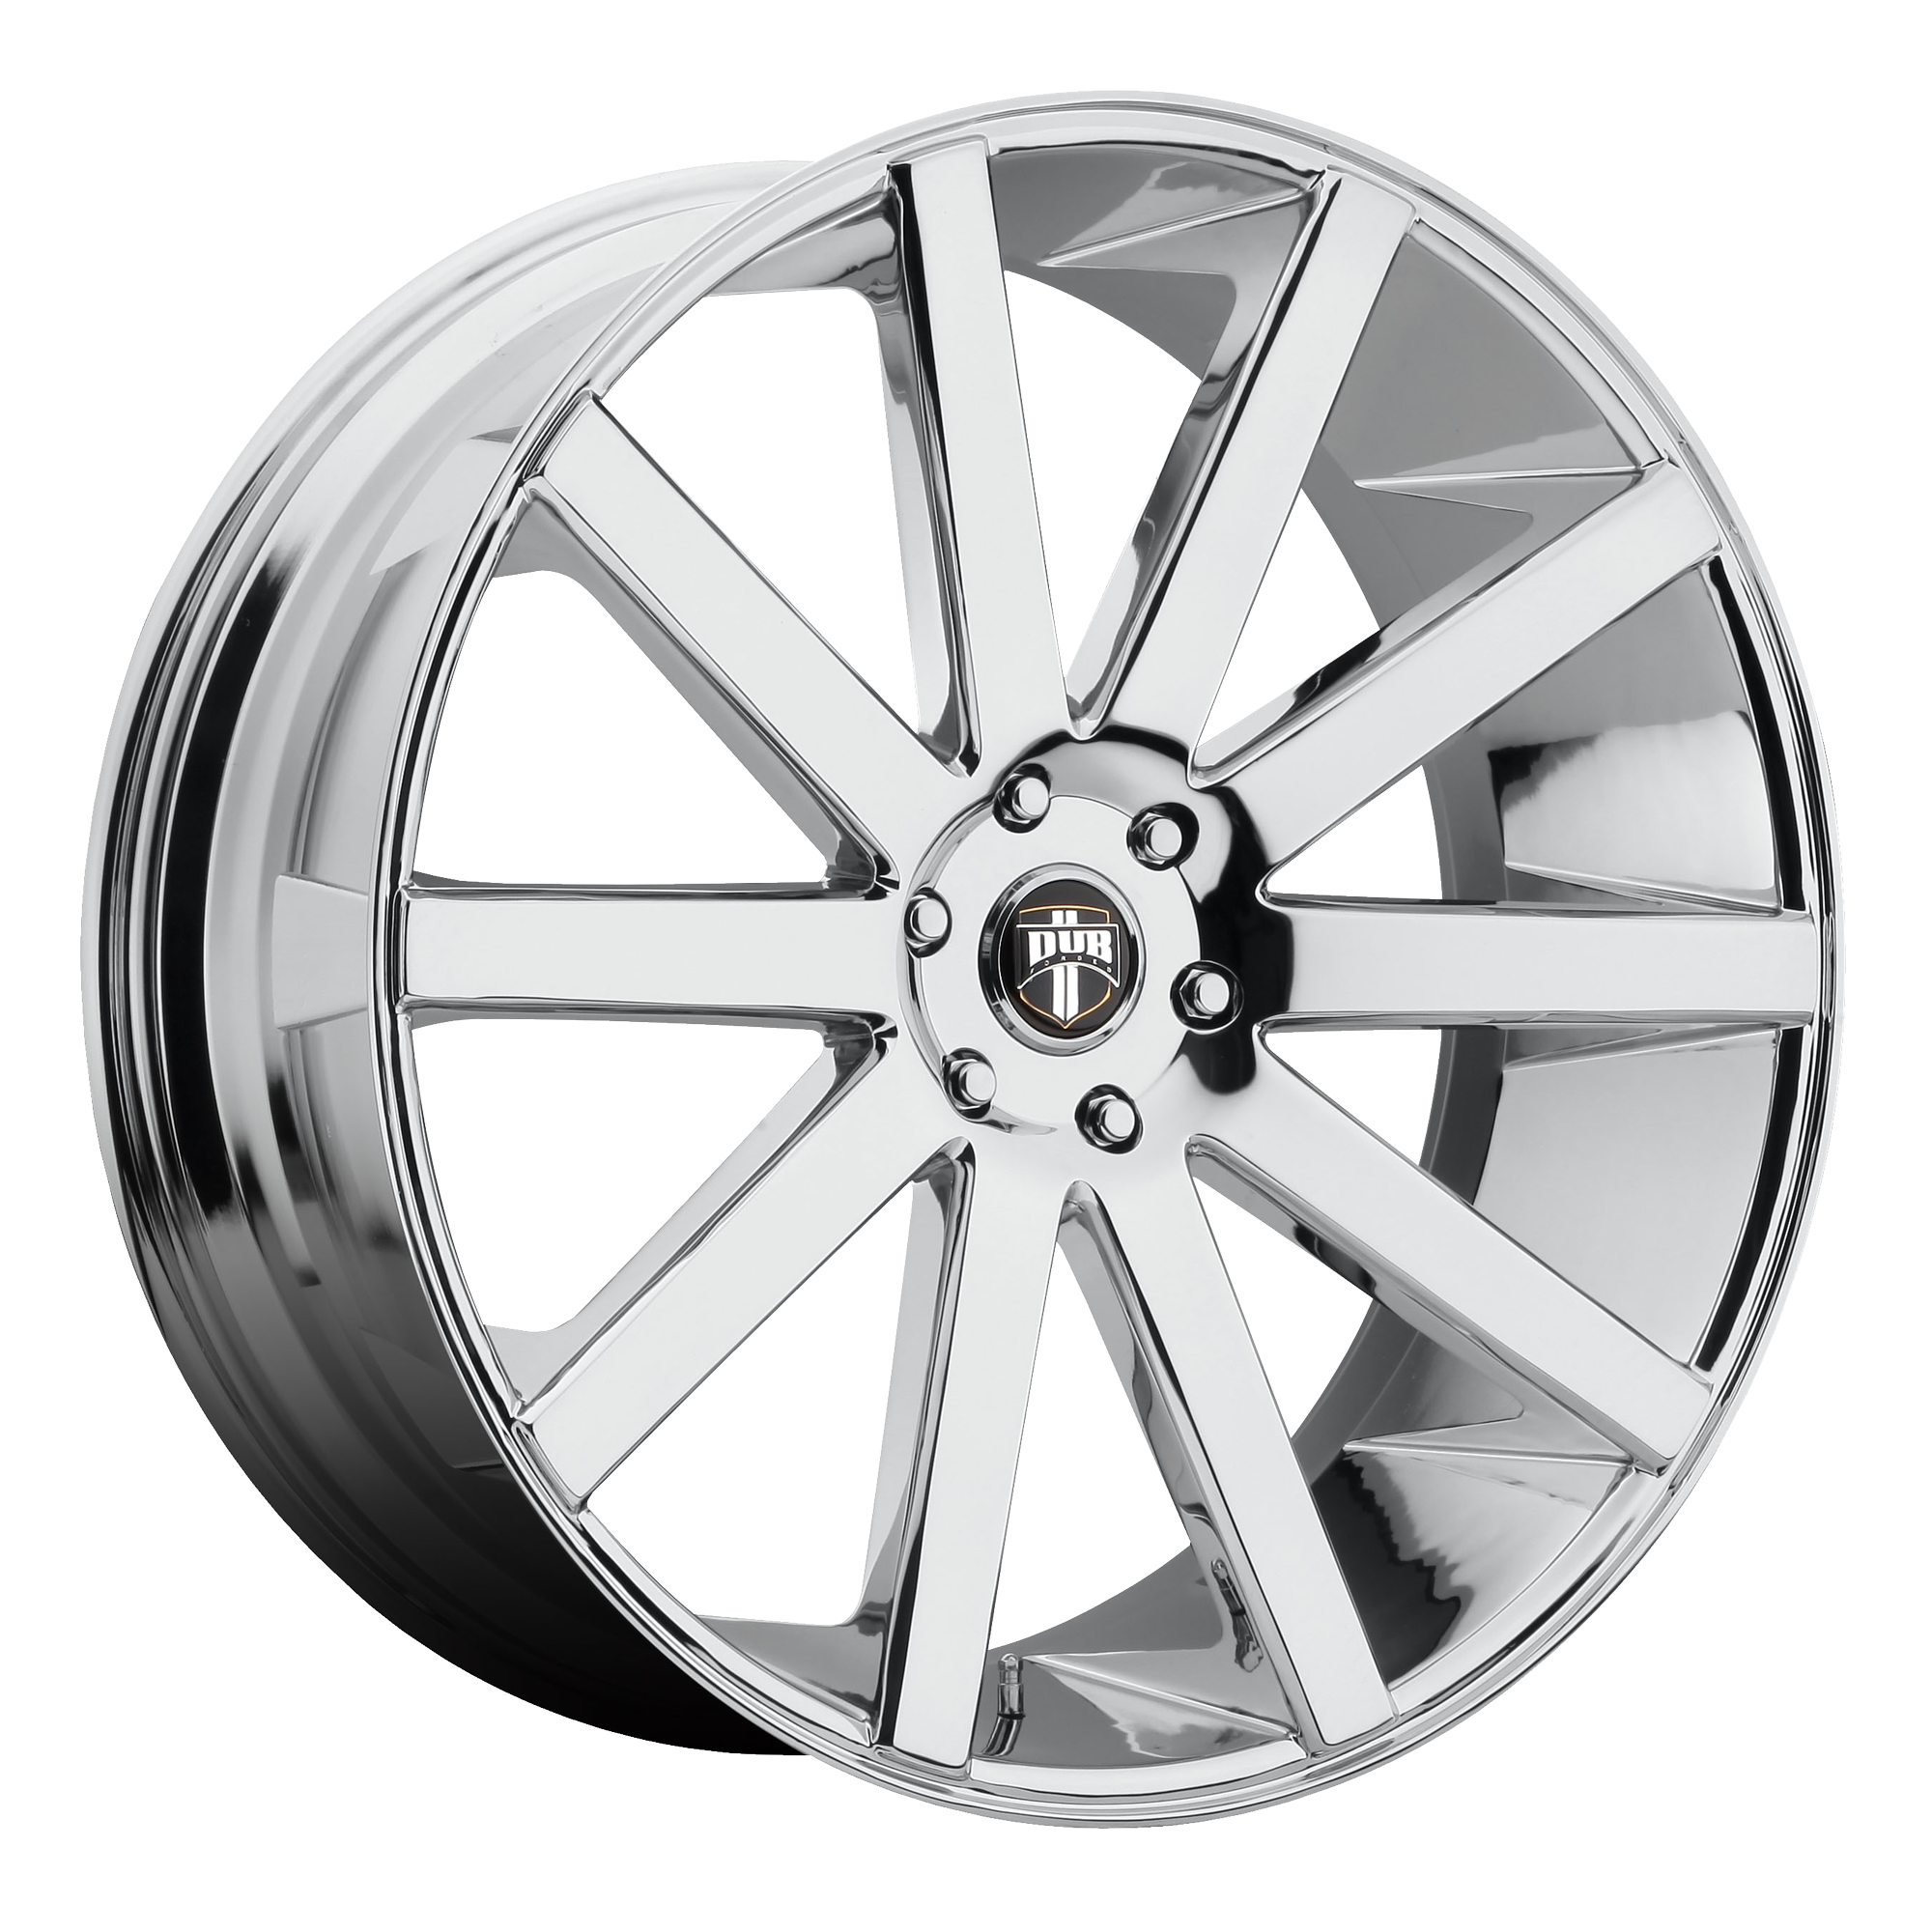 SHOT CALLA 28x10 6x139.70 CHROME PLATED (30 mm) - Tires and Engine Performance